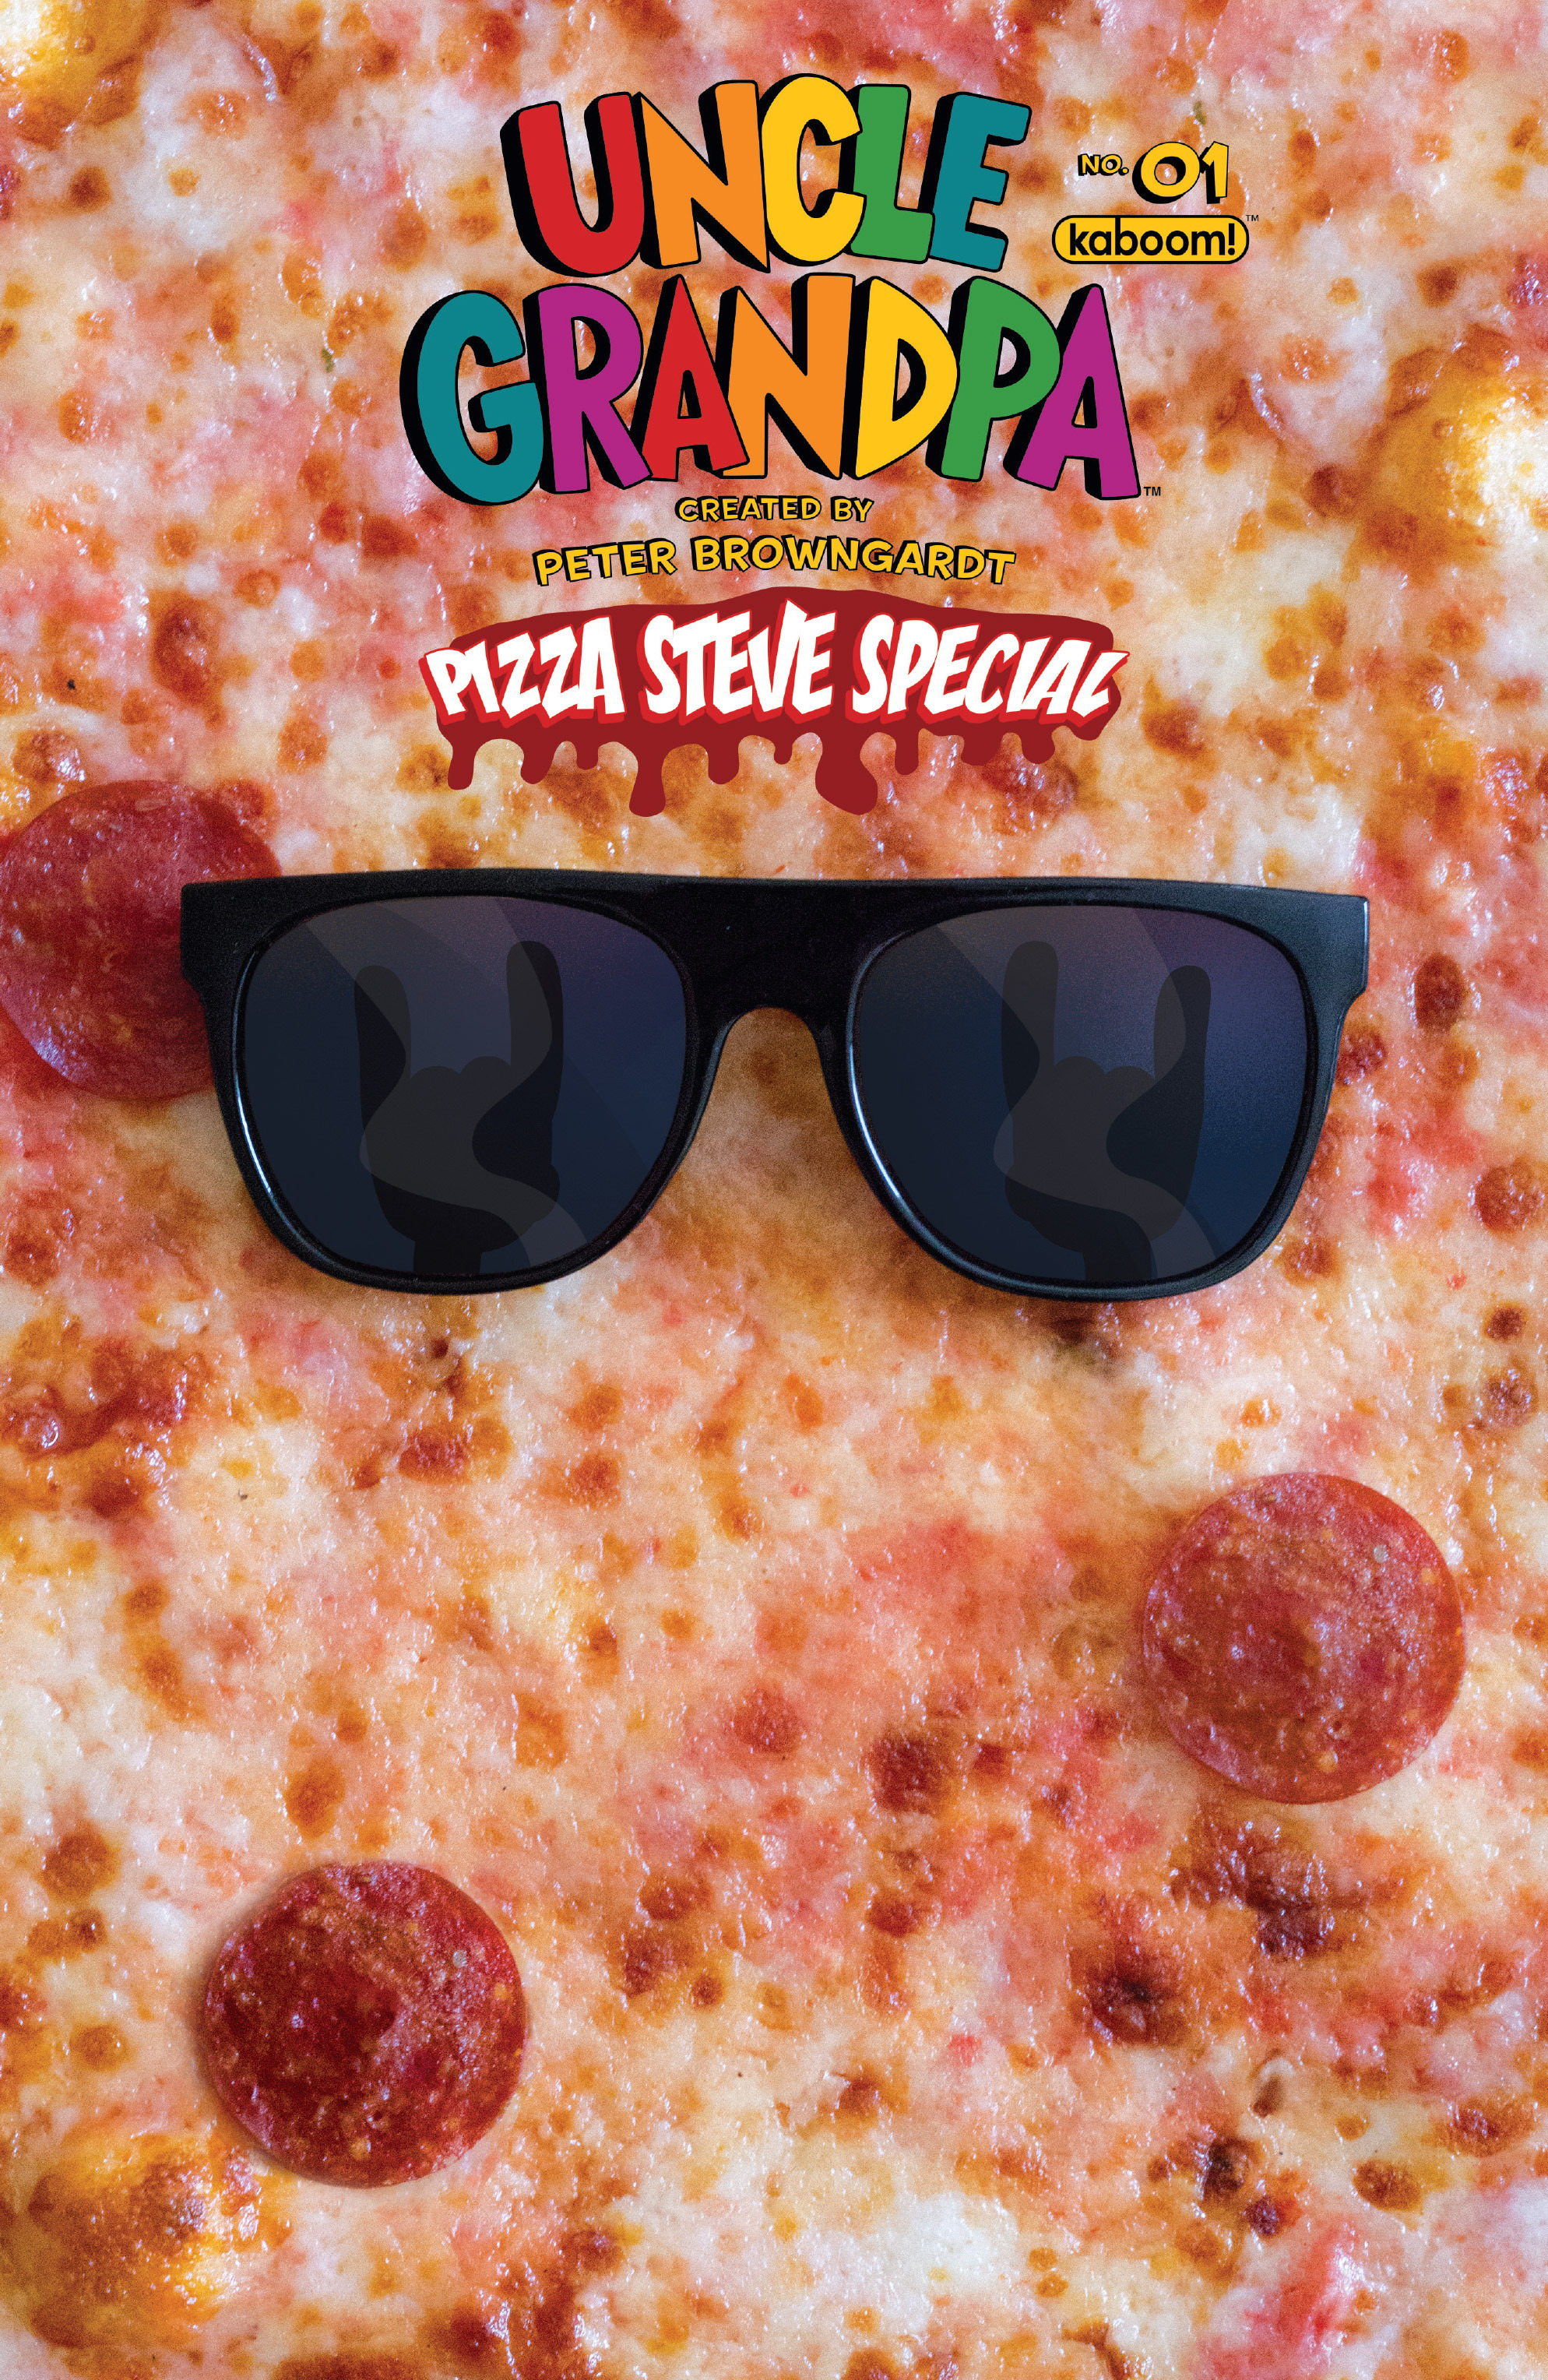 Read online Uncle Grandpa: Pizza Steve Special comic -  Issue # Full - 1